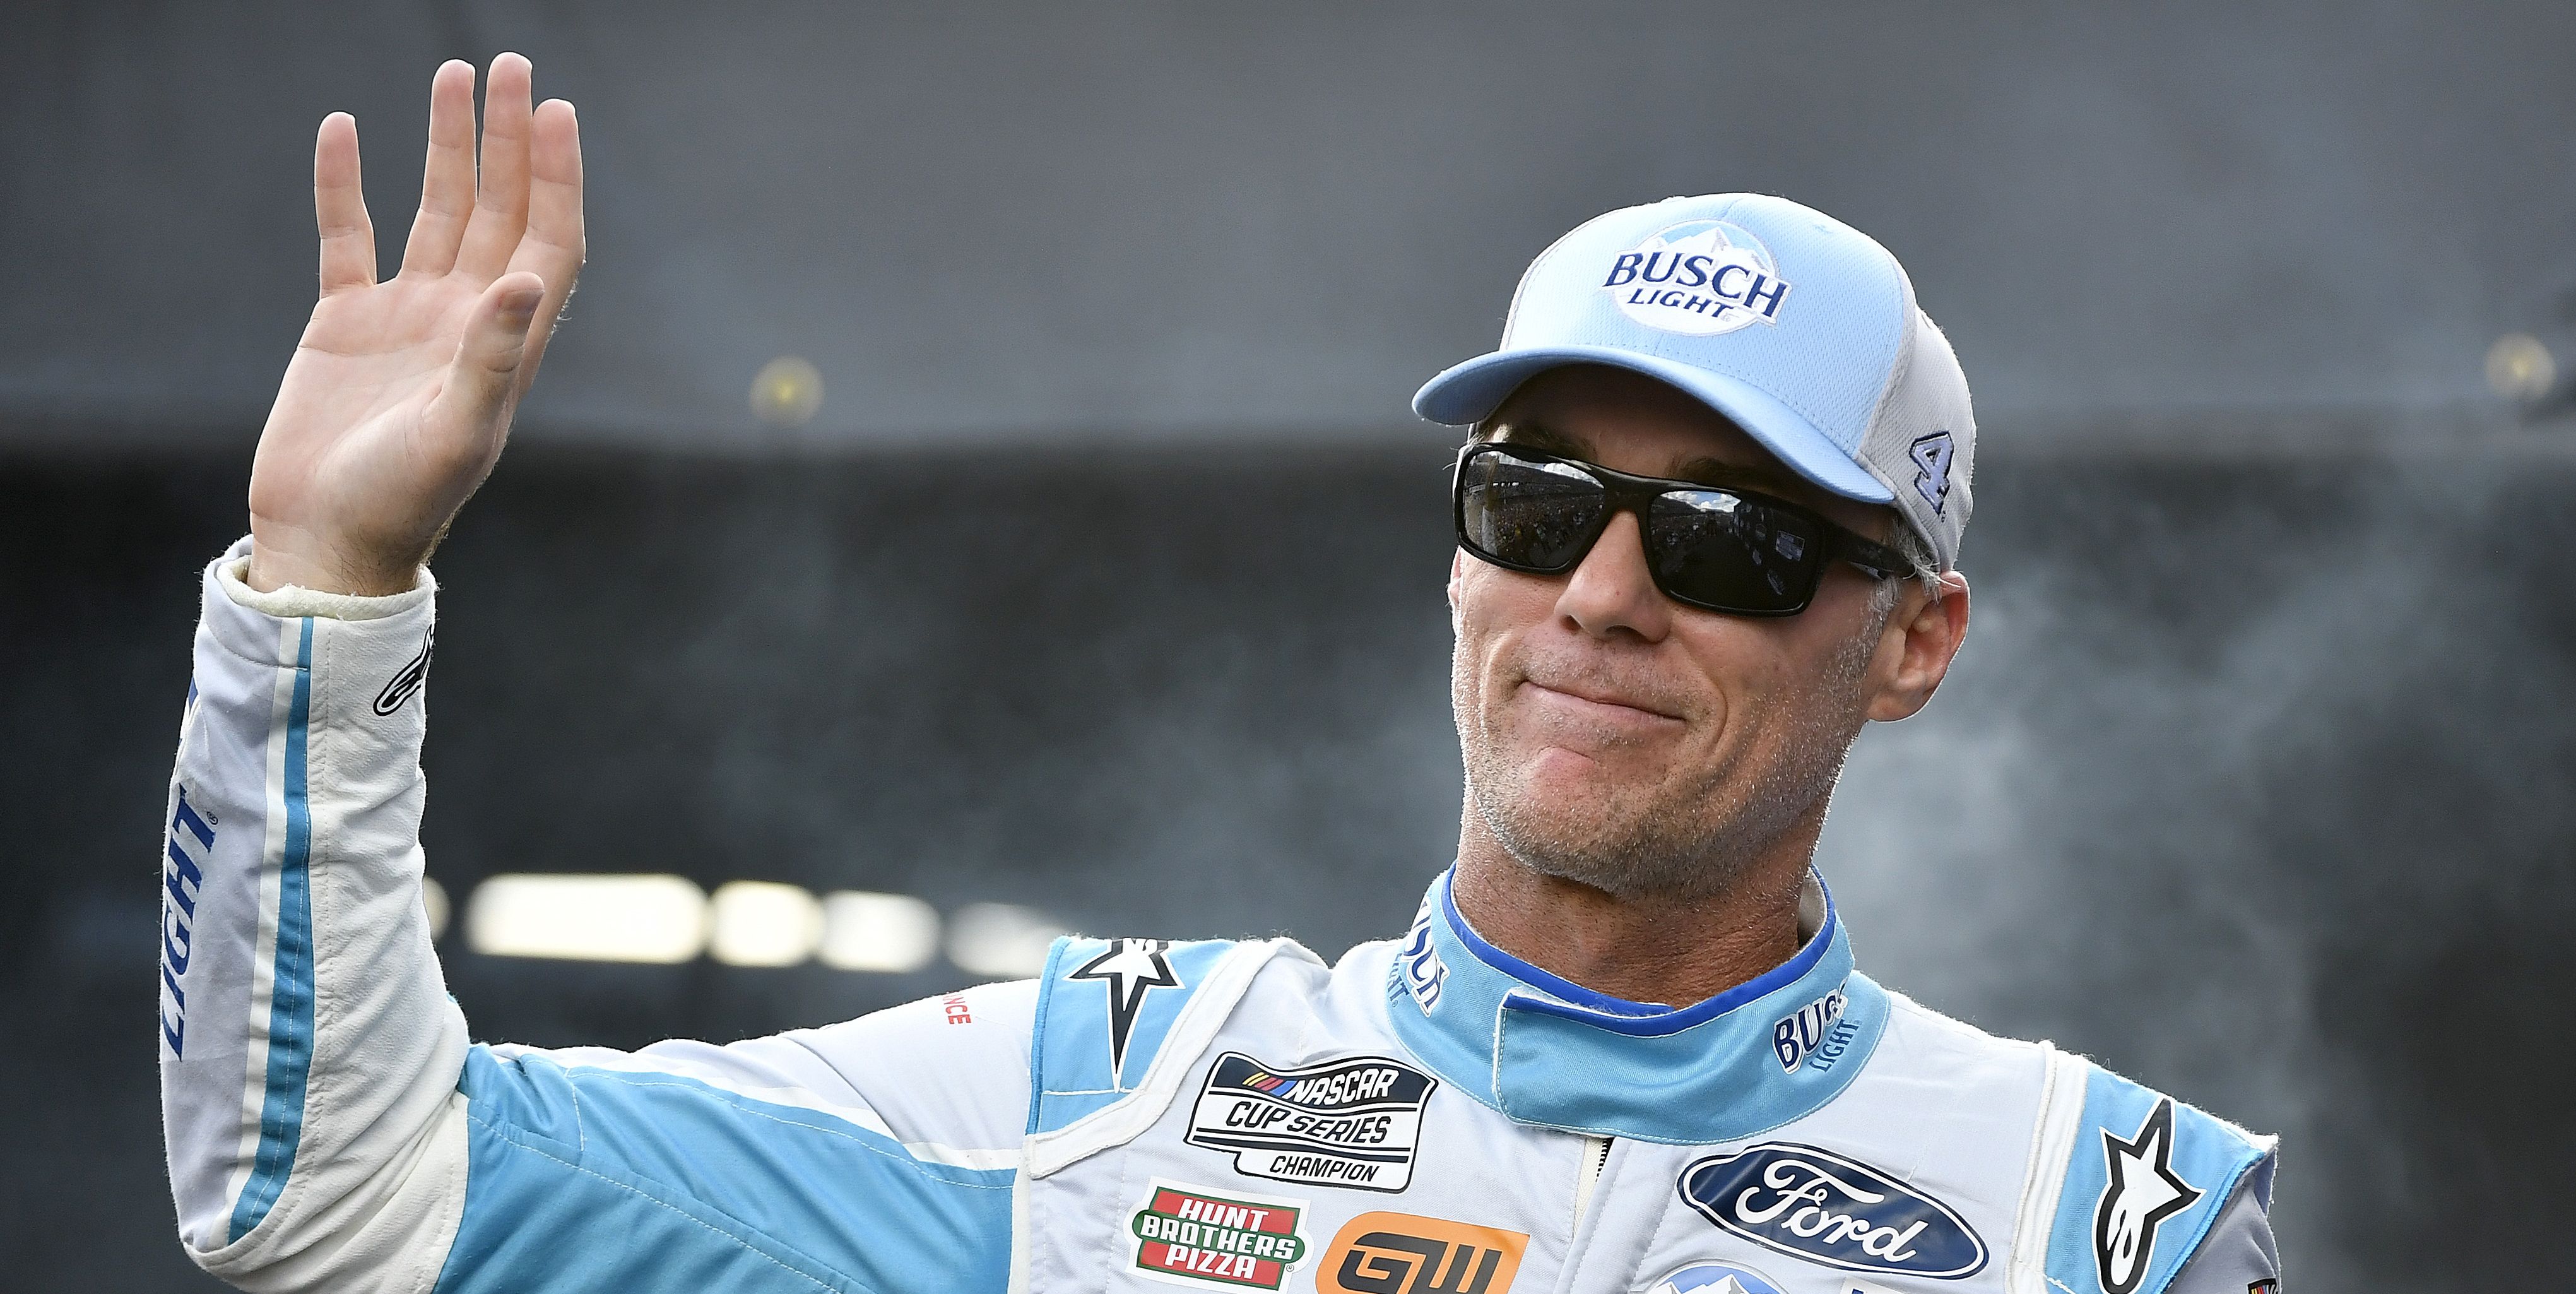 NASCAR VP Hits Back at Kevin Harvick Over Car Fire Comments